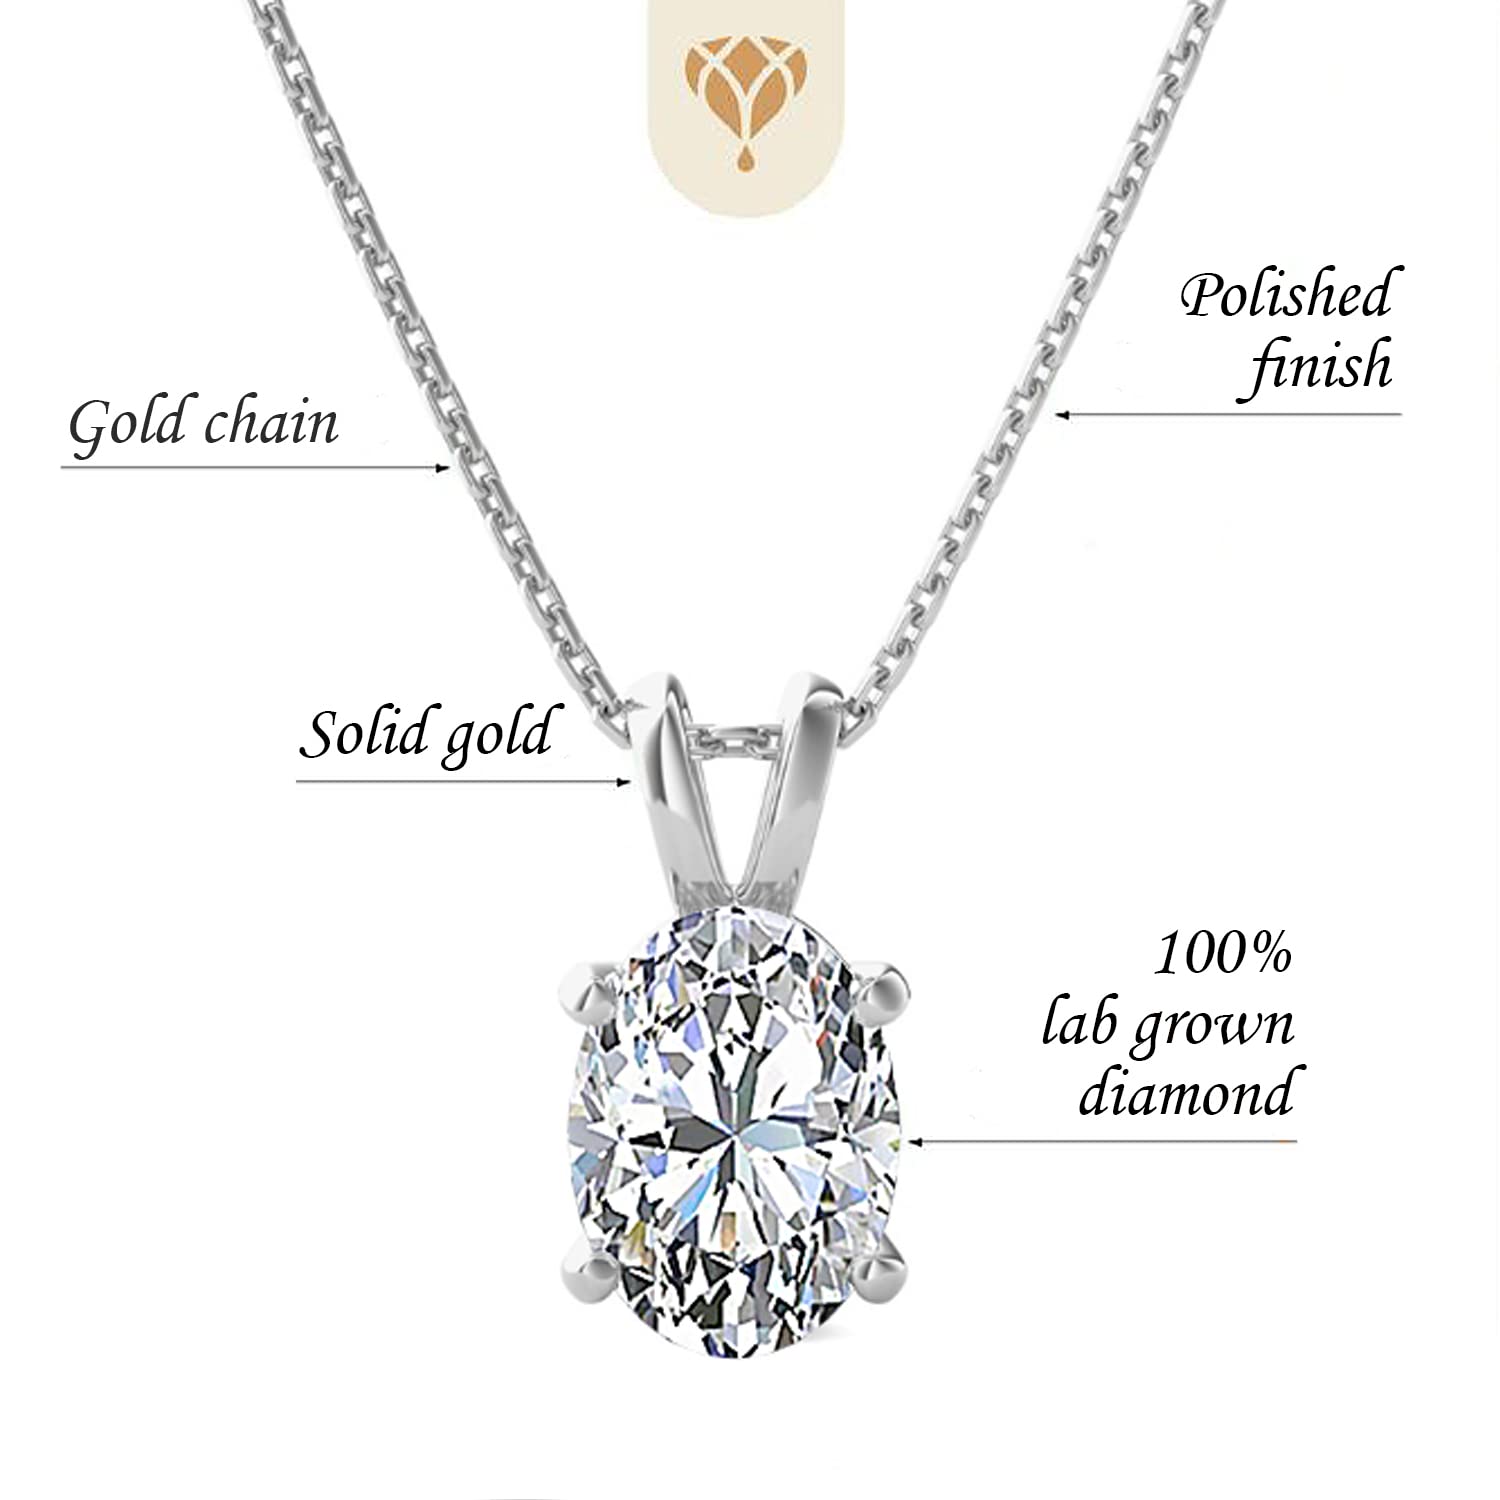 VS1-VS2 Clarity (.25-1.00 Carat) Cttw Lab-Grown Oval Shape Solitaire Diamond Pendant Necklace Womens Girls |14k Yellow or White or Rose/Pink Gold with 18